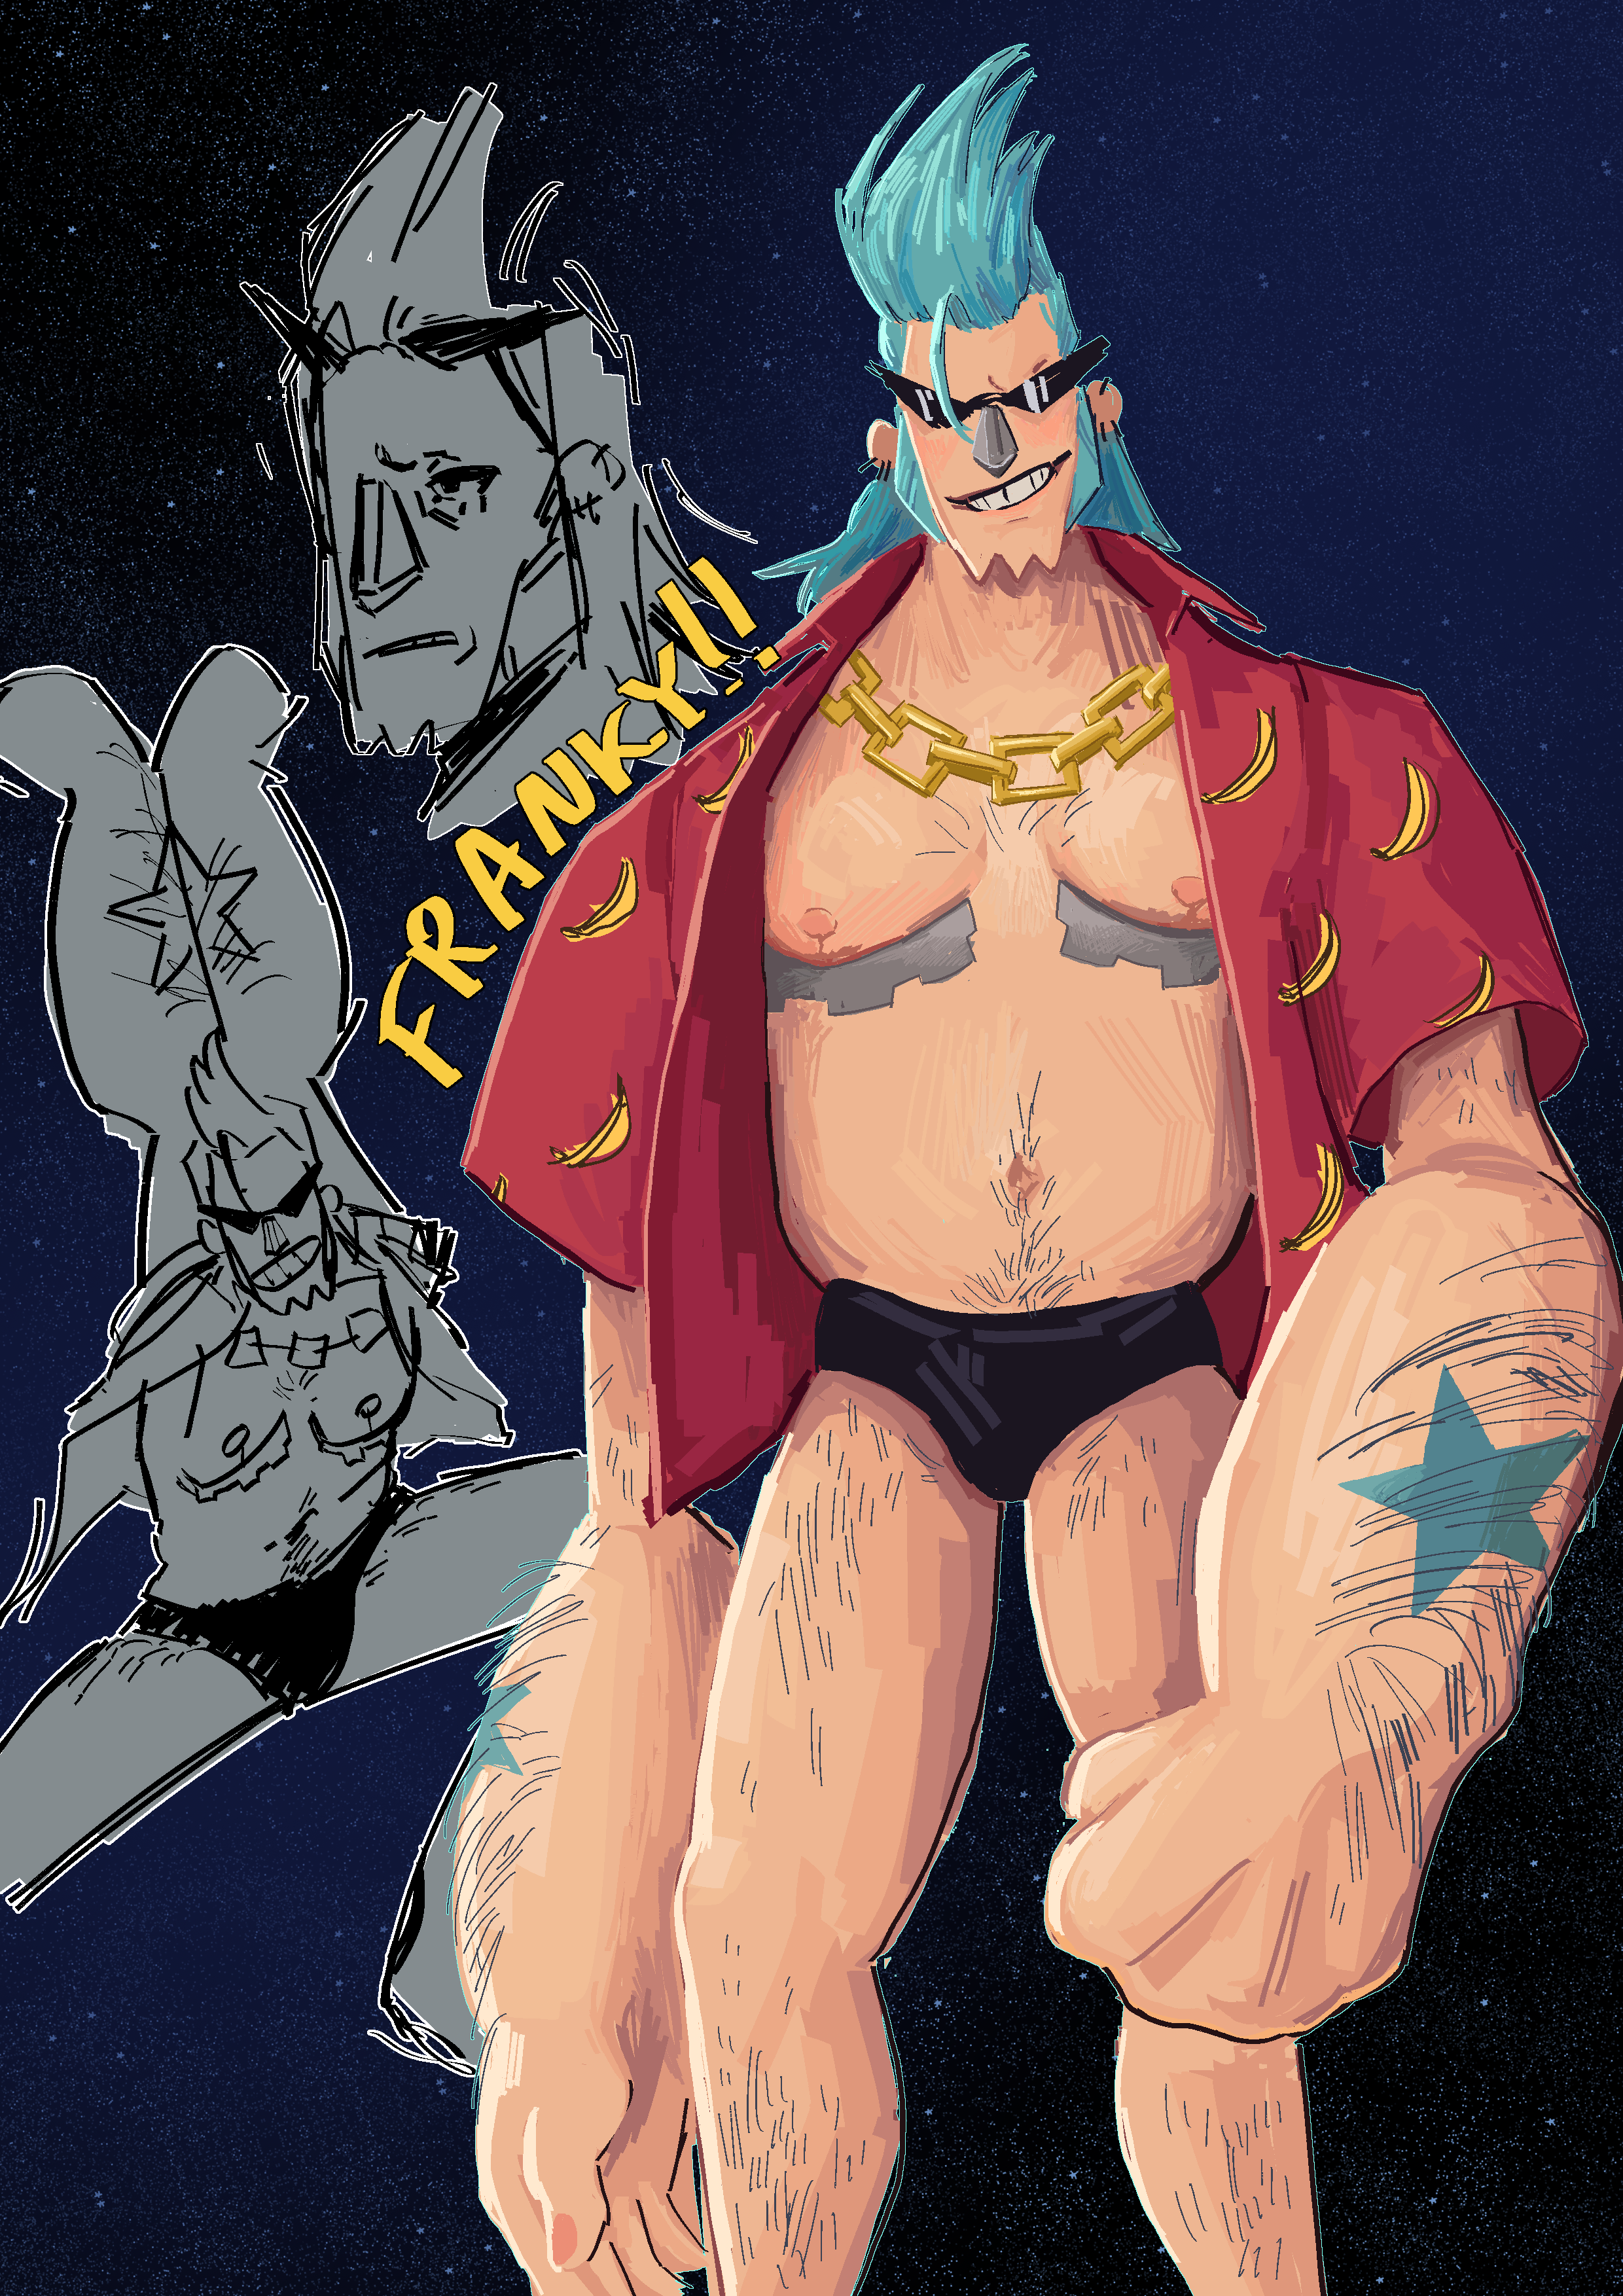 A few digital drawings of Franky from One Piece. The largest is a full-color drawing of him about the calves up. He's grinning at the camera with his shades shining, and he's in his water 7 outfit, with notable gear shaped top-surgery scars. The other two drawings behind him are much looser and uncolored. Top is a portrait of him looking a bit worried at something unseen. The second is him doing his signature pose, arms together above his head. The background is a dark blue with a vague starry pattern.